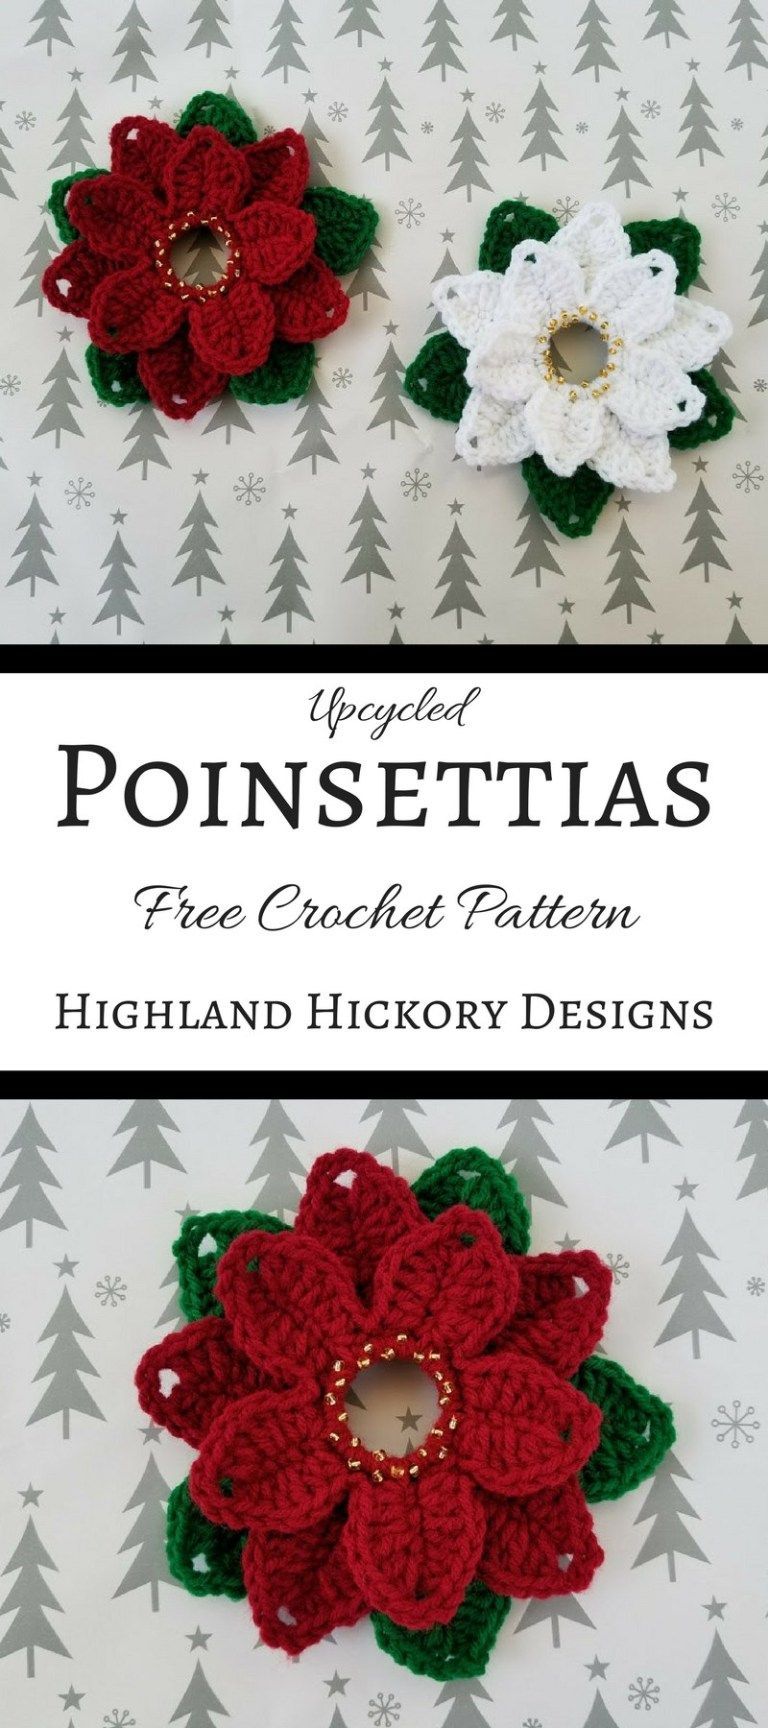 Upcycled Poinsettias - Highland Hickory Designs - Free Crochet Pattern -   23 xmas decorations to make free pattern ideas